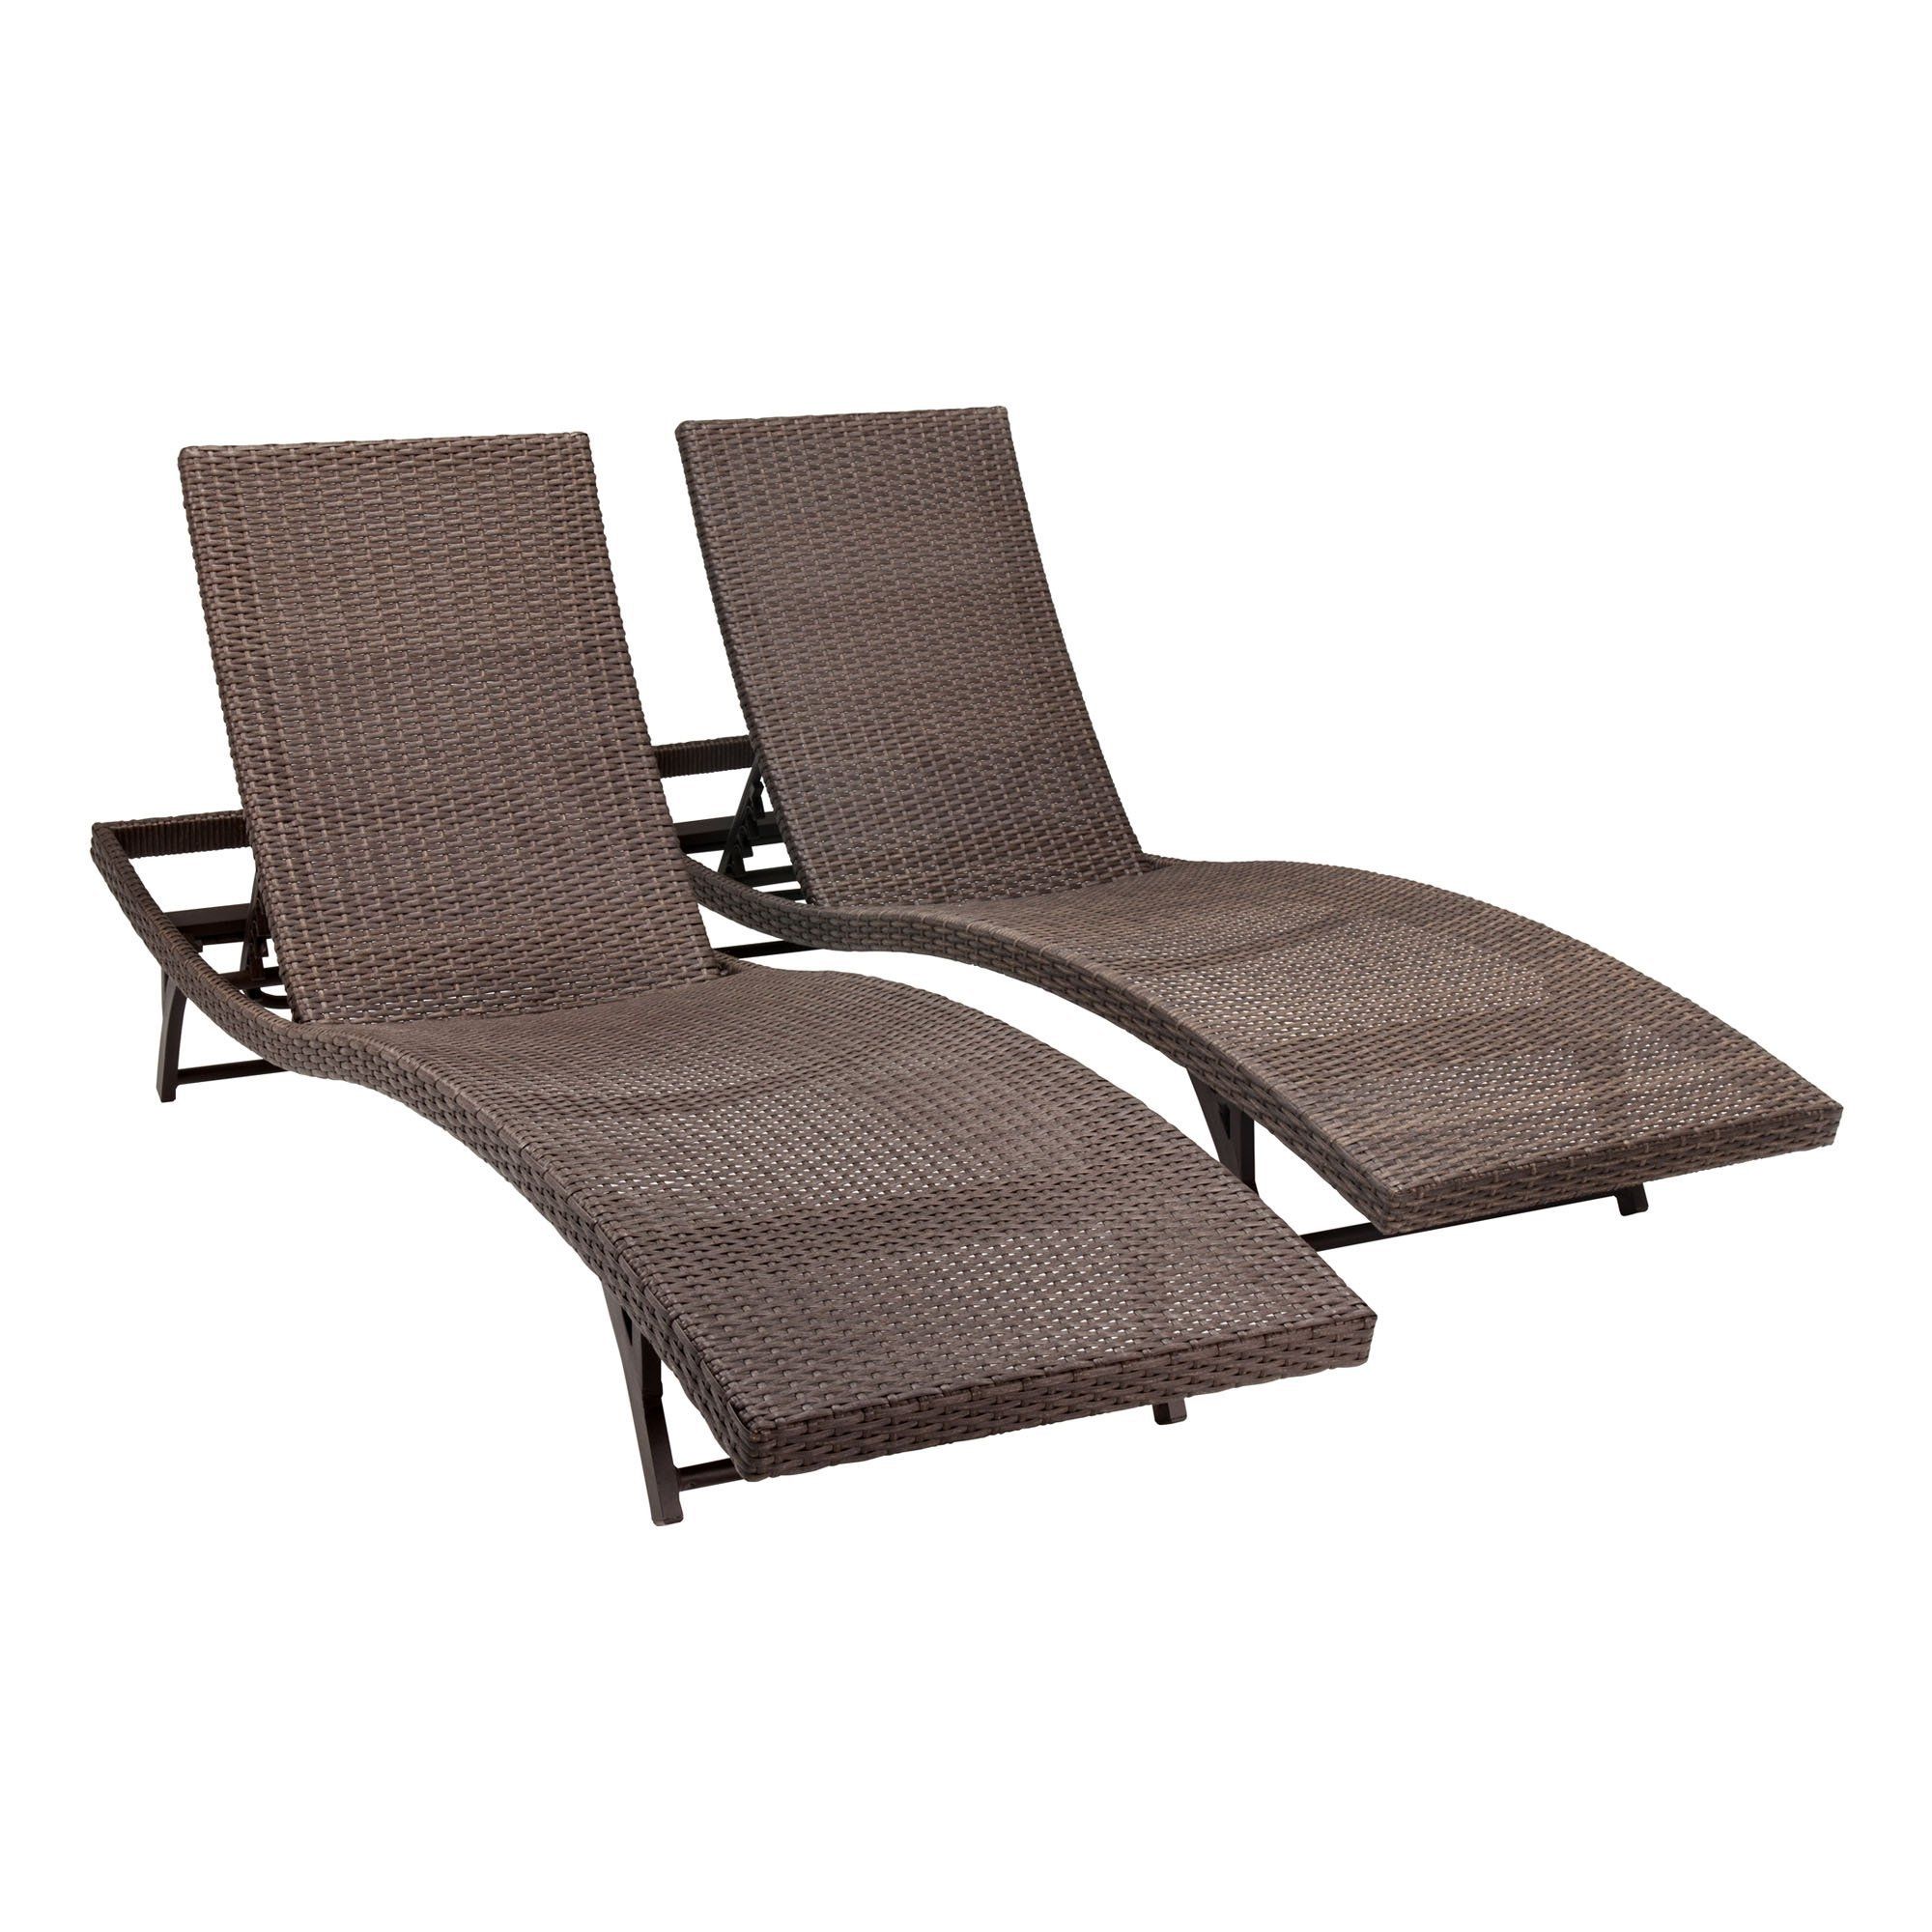 Outdoor Chaise Lounge Chairs Ideas : Best Outdoor Chaise Lounge Within Current Outdoor Chaise Lounge Chairs (View 8 of 15)